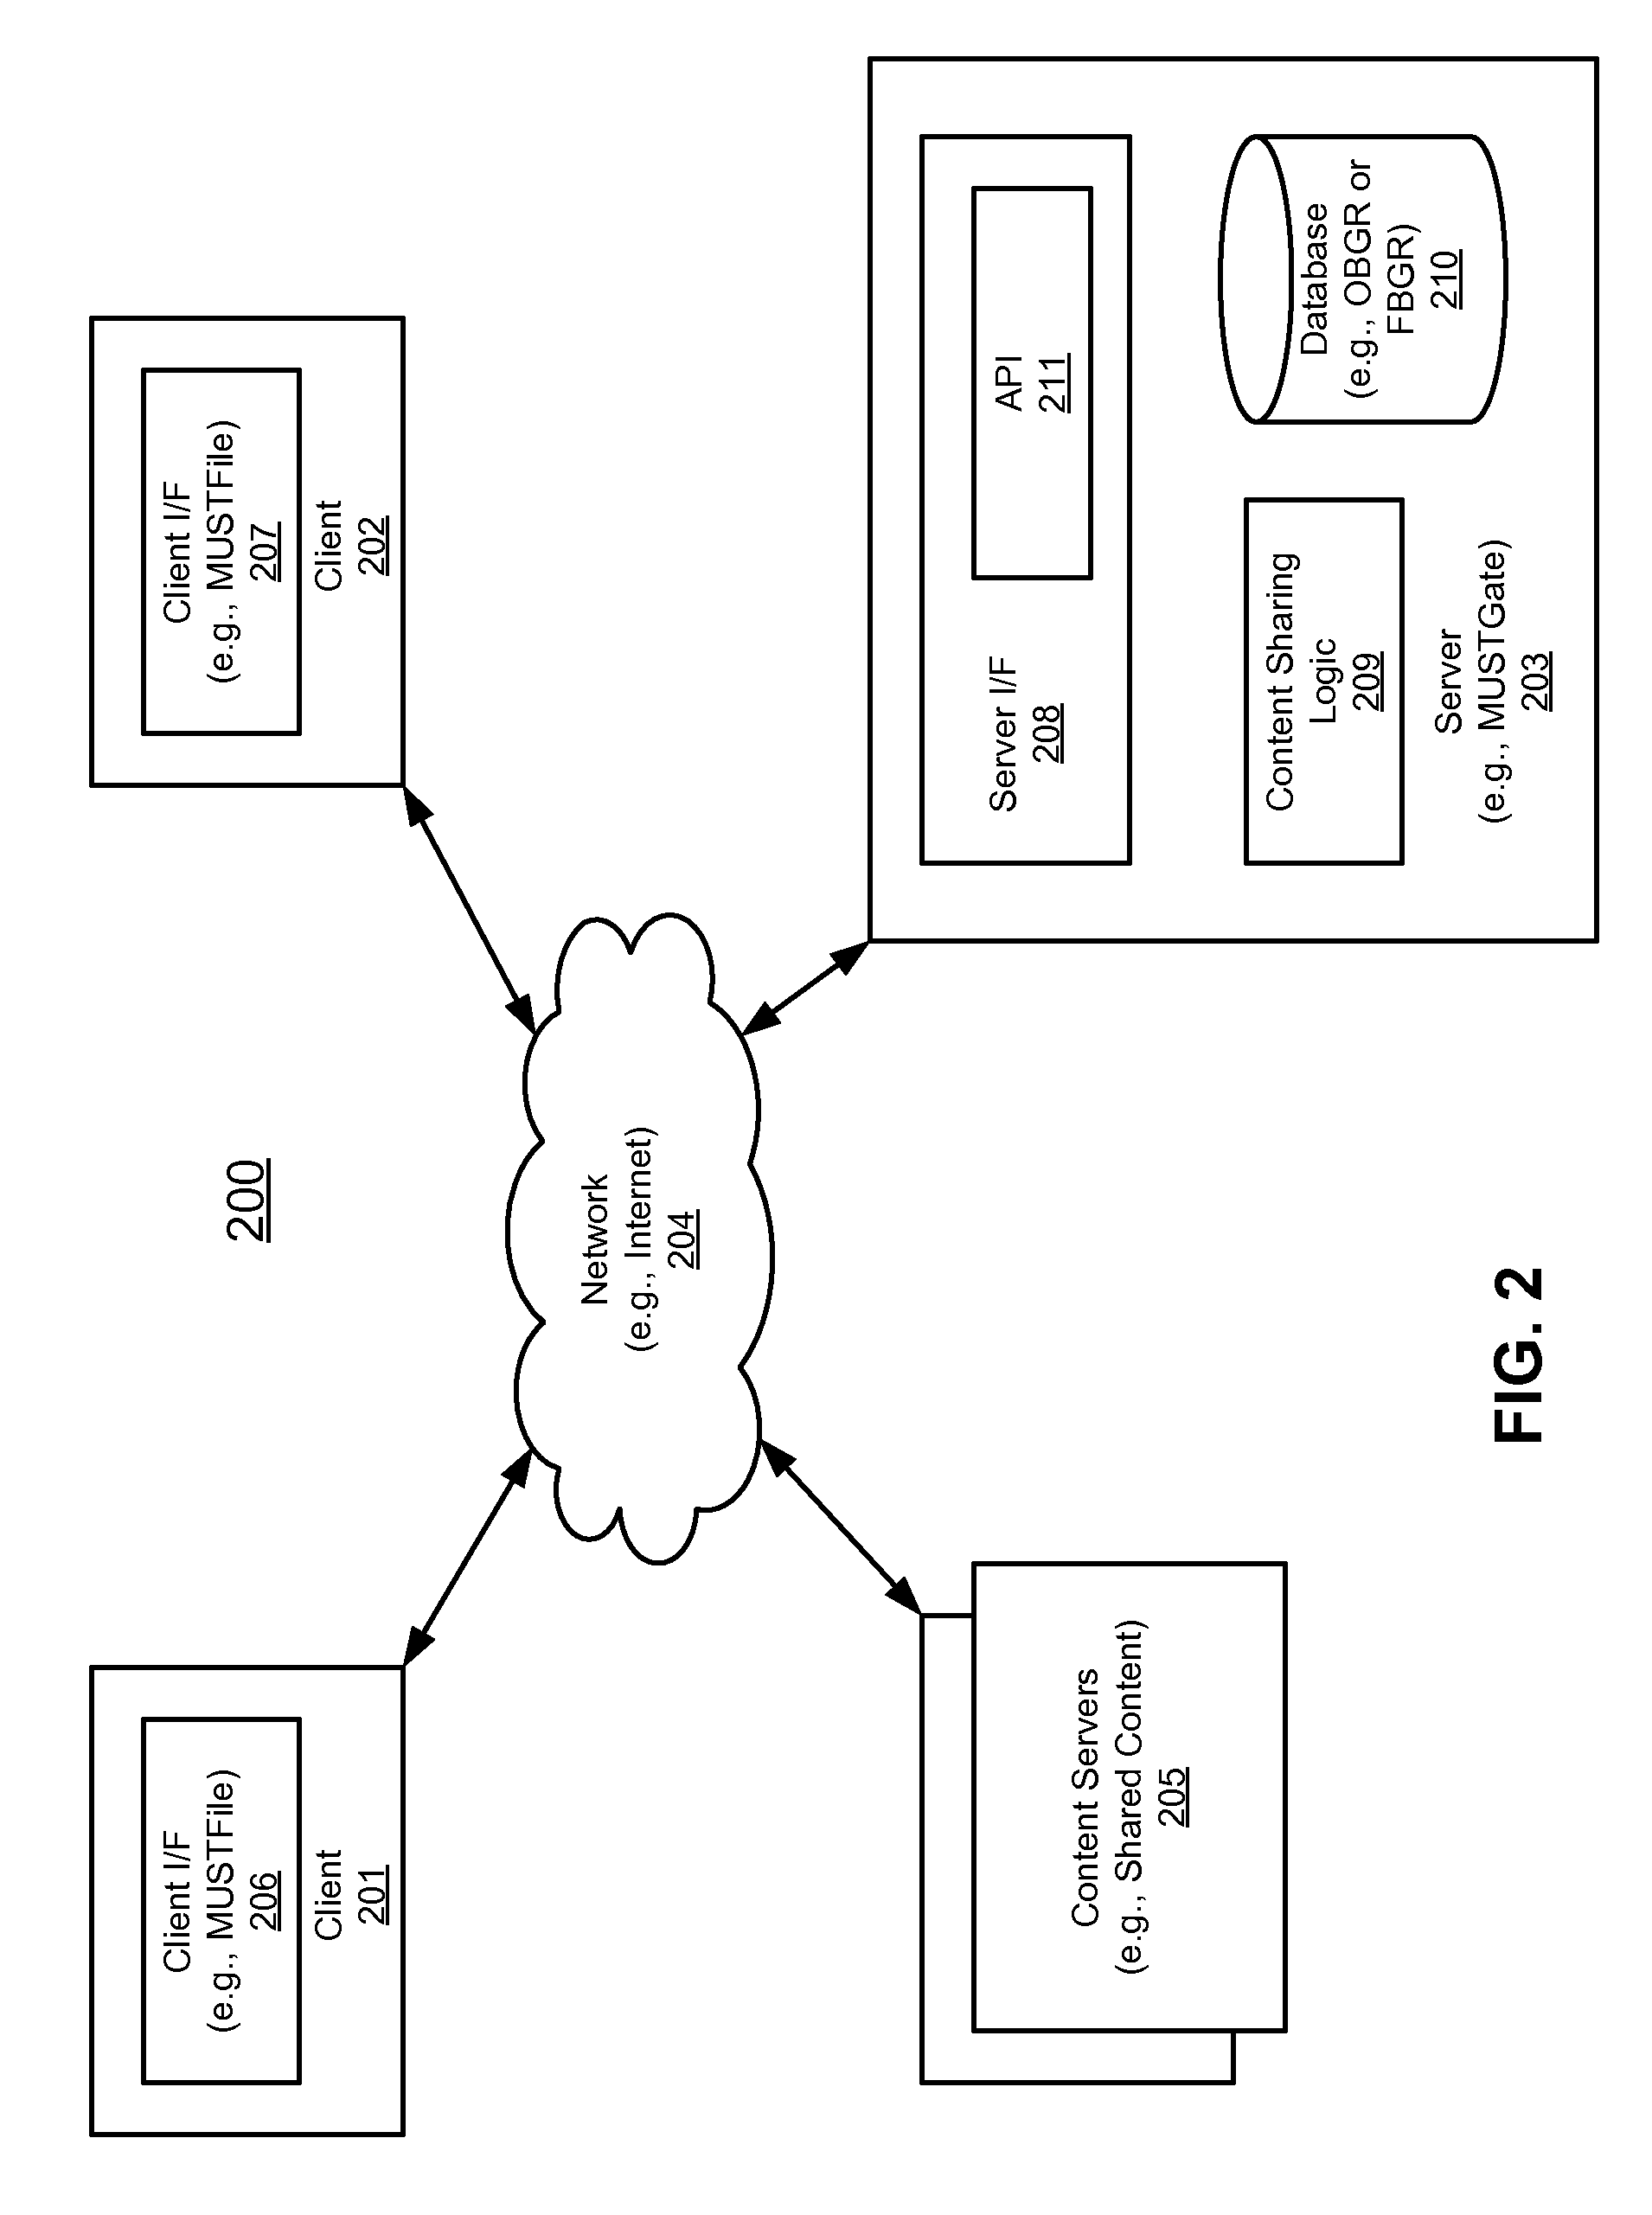 Method and apparatus for sharing content among multiple users